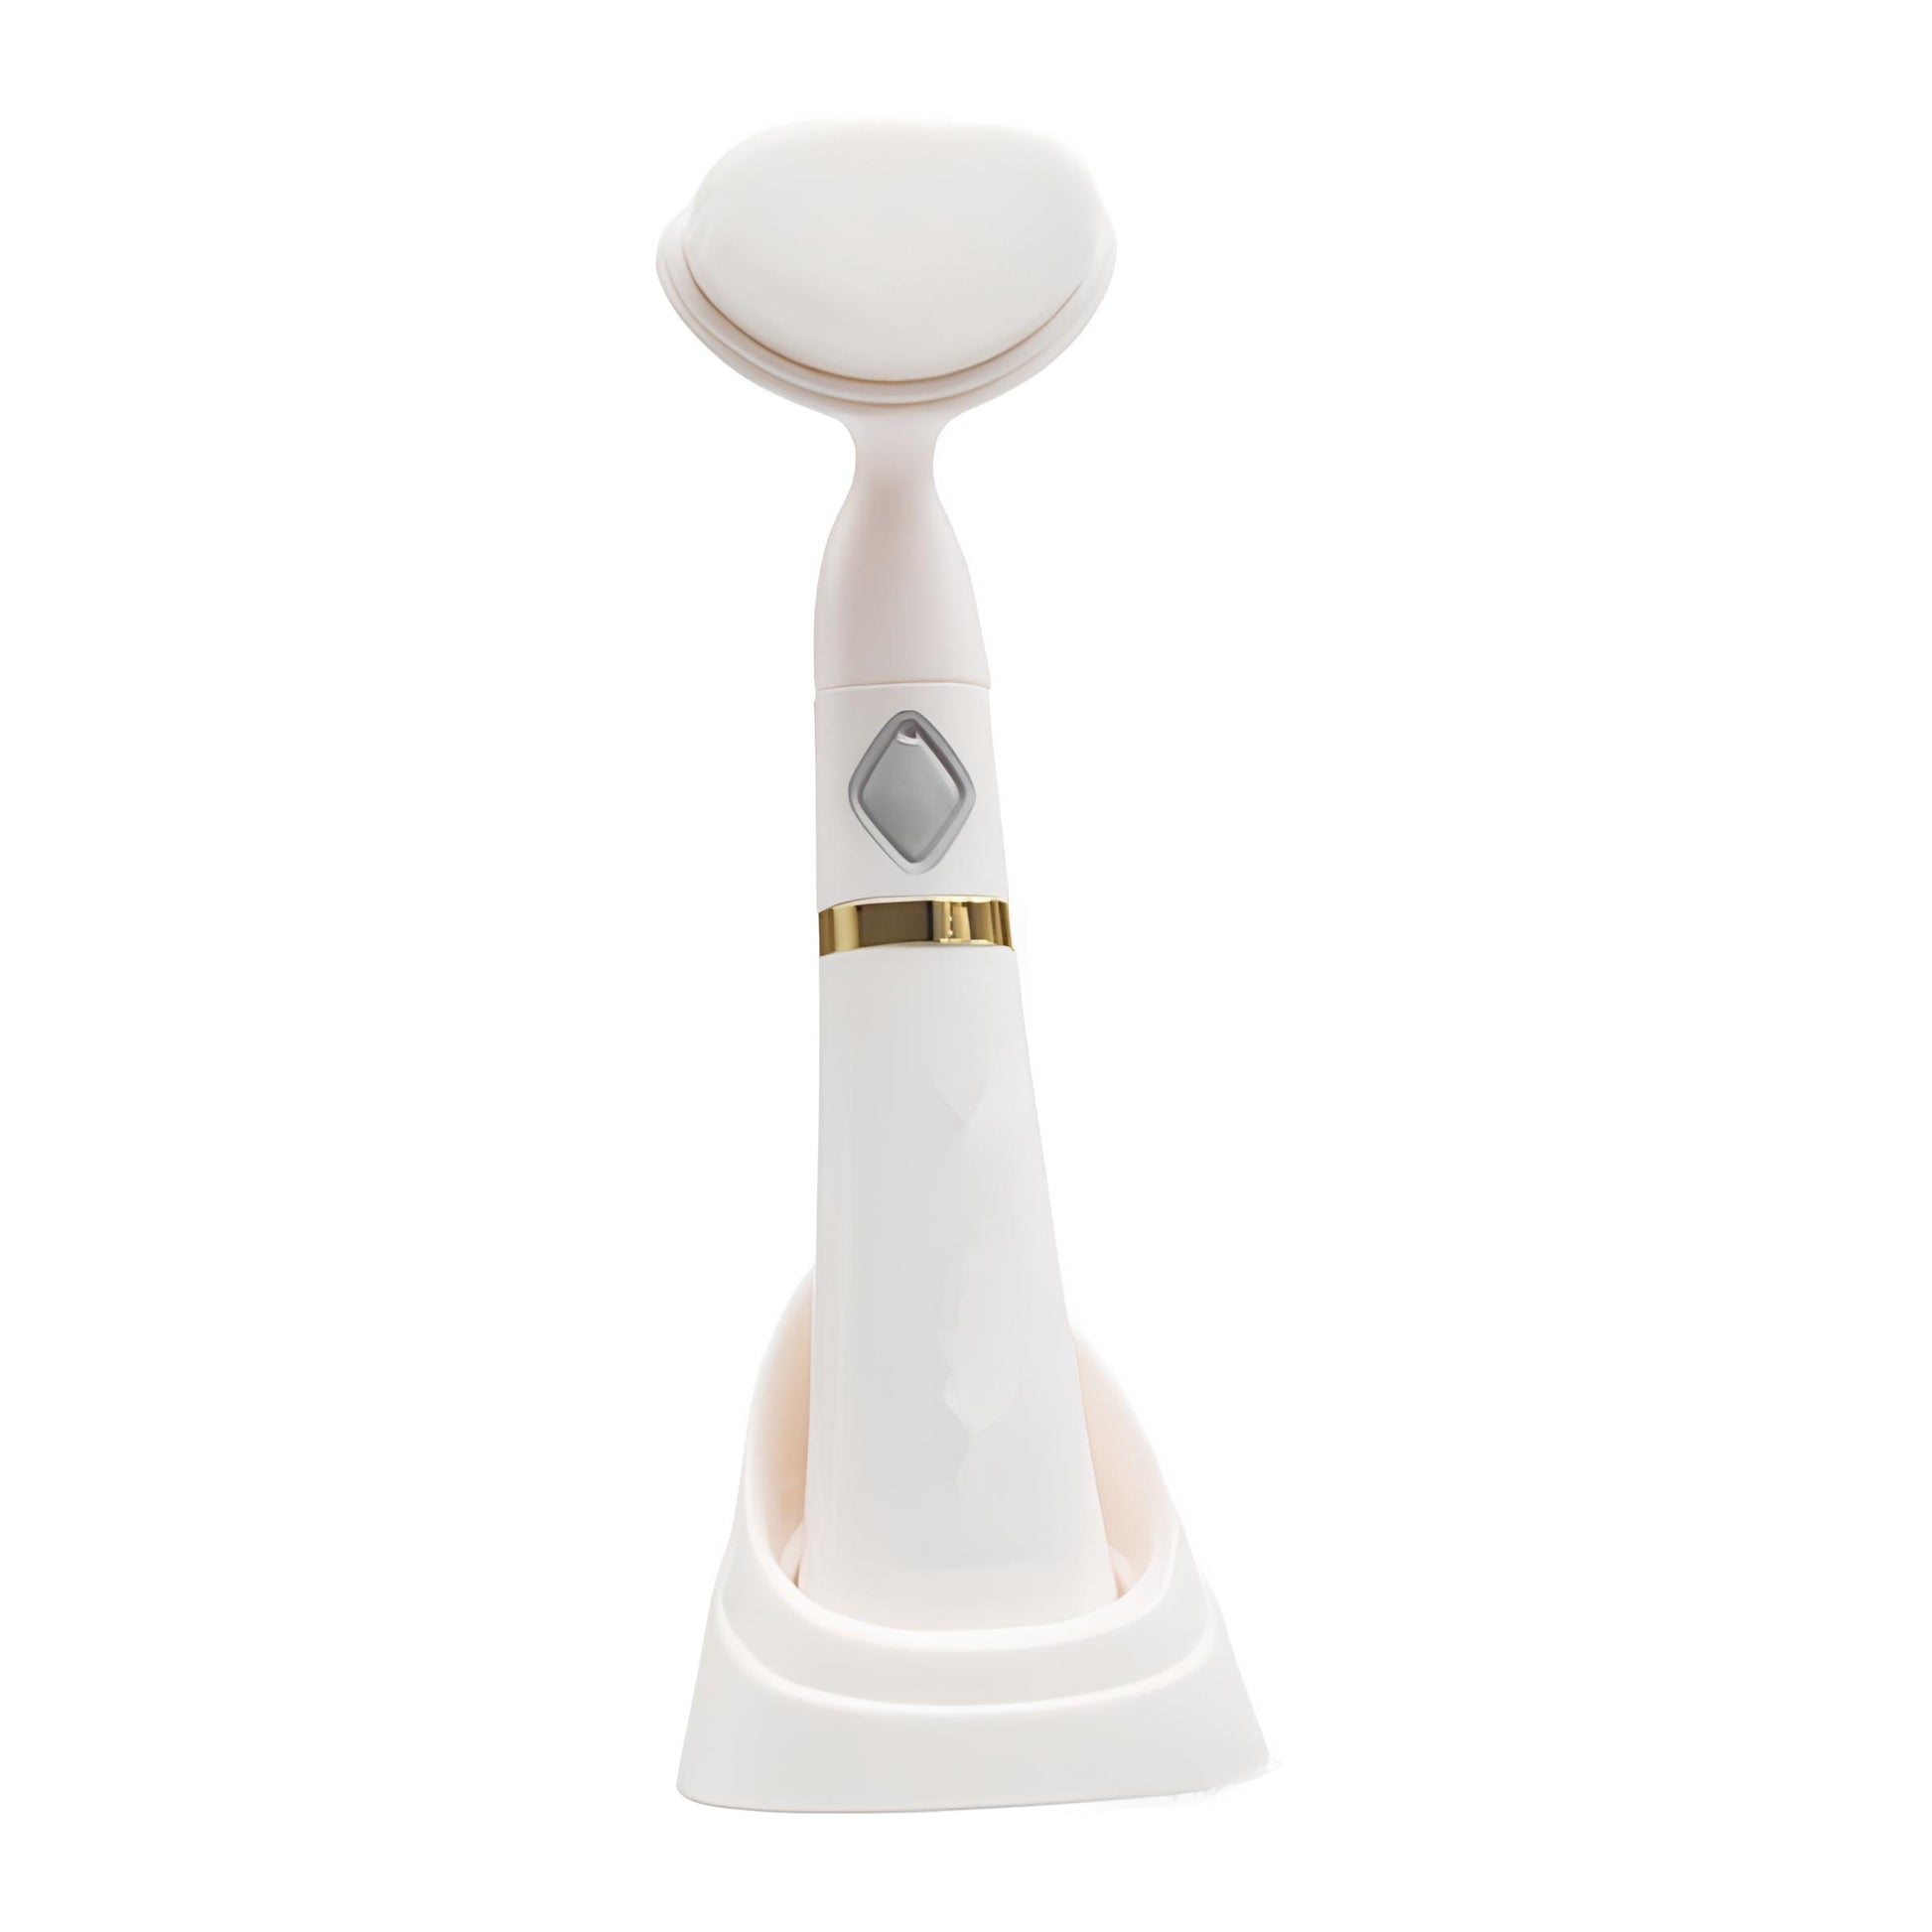 Elegant electric face brush with white and gold components, designed to provide a luxurious cleansing experience. Effortlessly removes dirt and makeup, leaving skin feeling smooth and refreshed. Portable size makes it easy to take on-the-go.